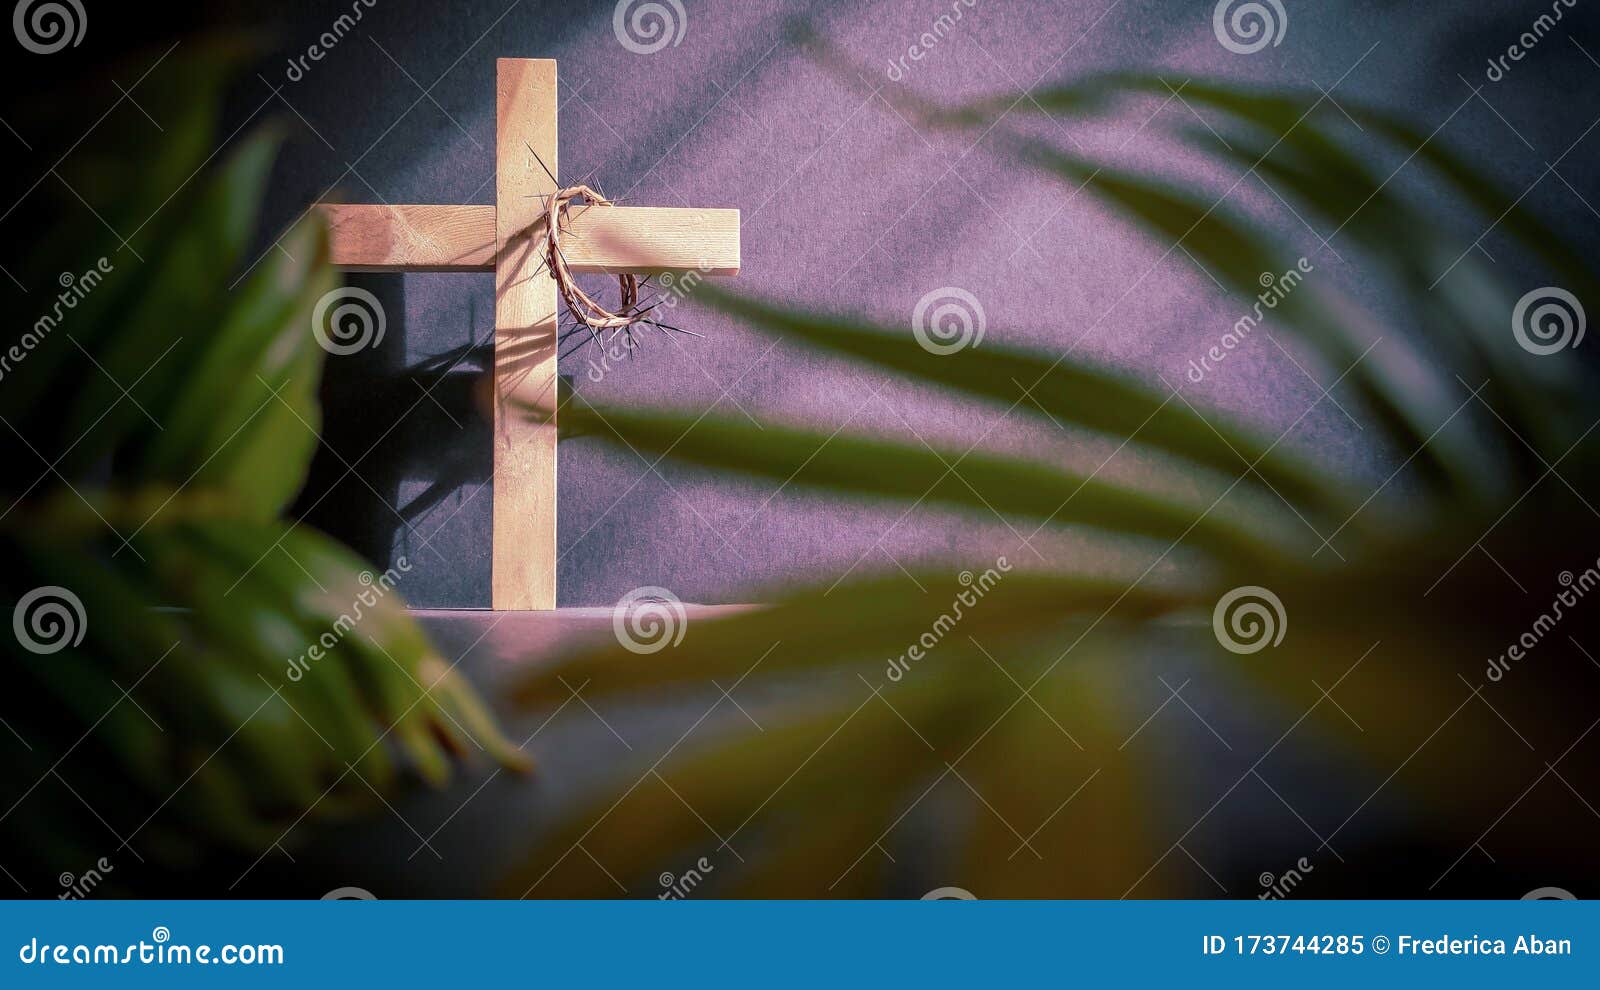 lent season,holy week and good friday  - image of wooden cross in vintage background